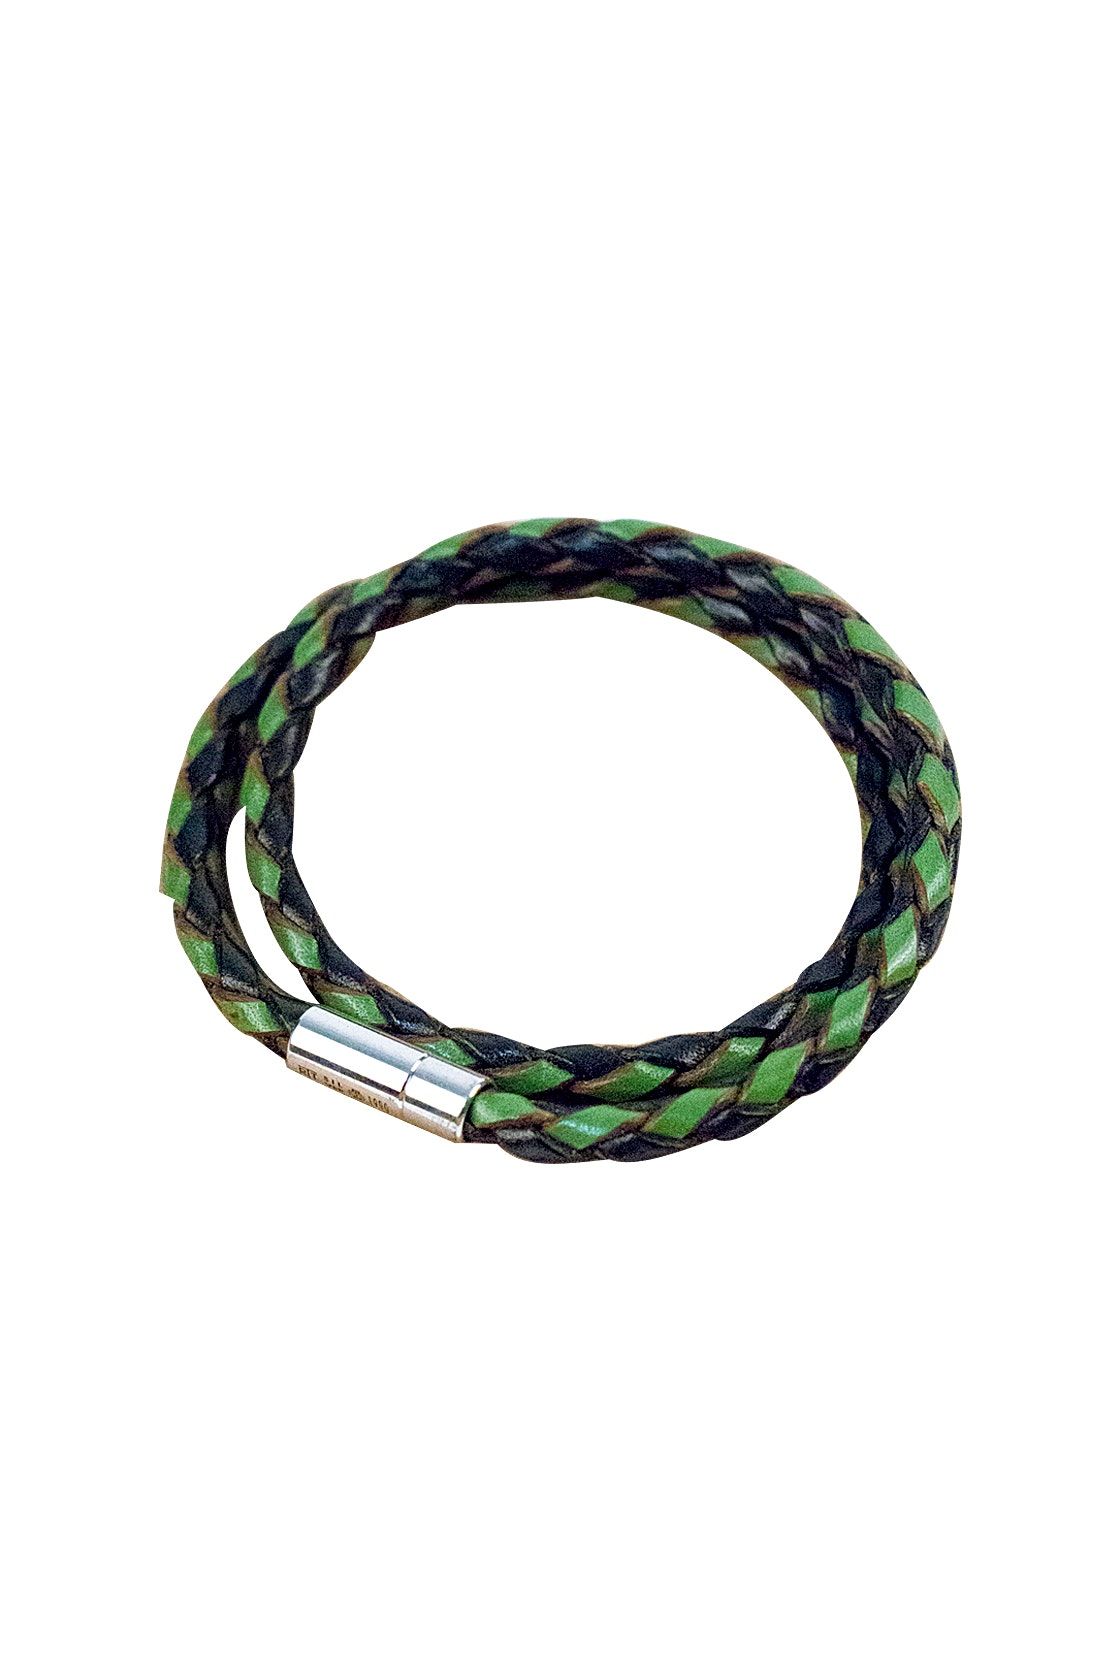 Tateossian Blue And Green Leather Bracelet